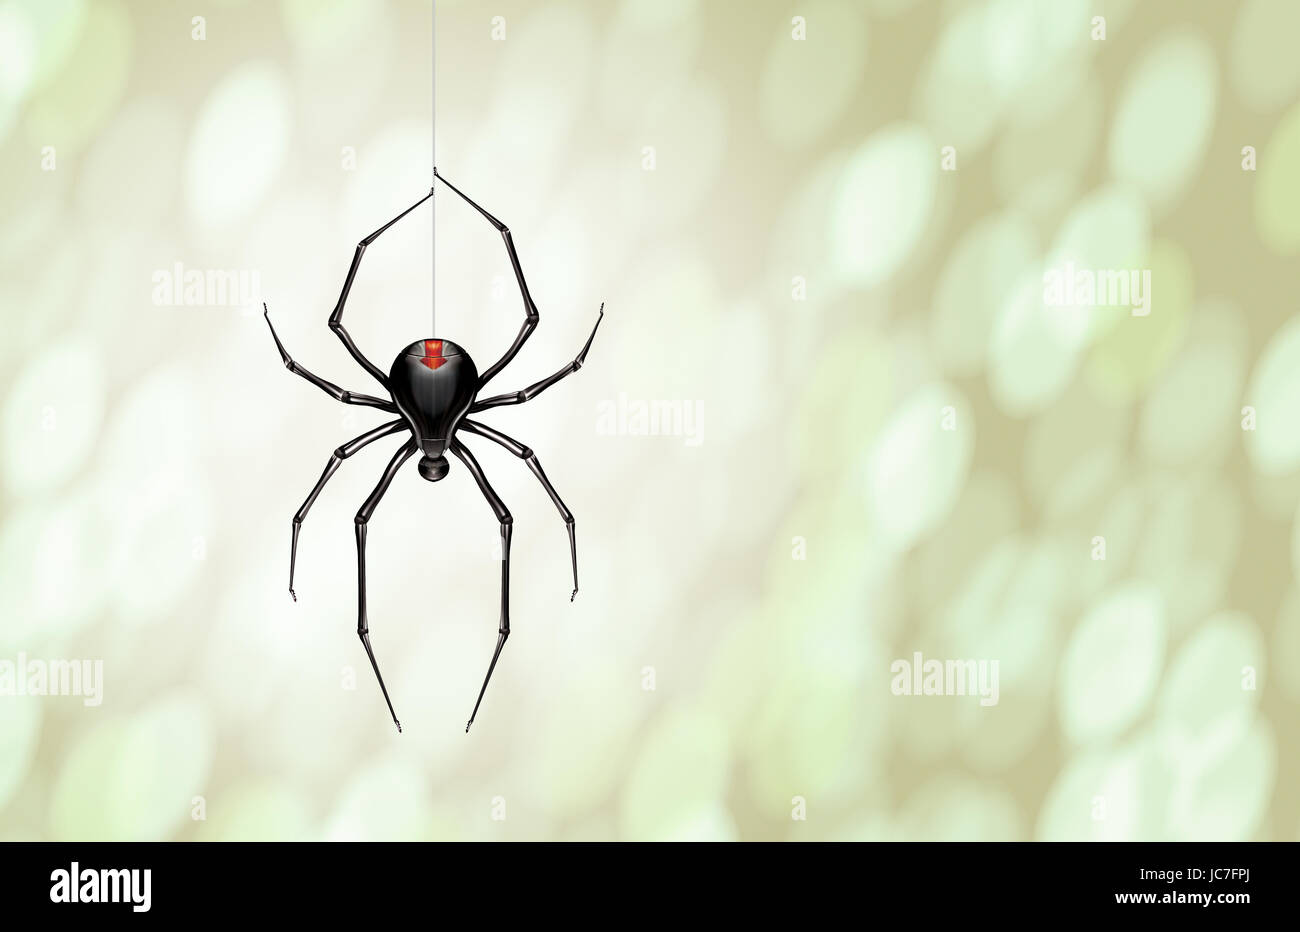 spider hanging from a web wallpaper